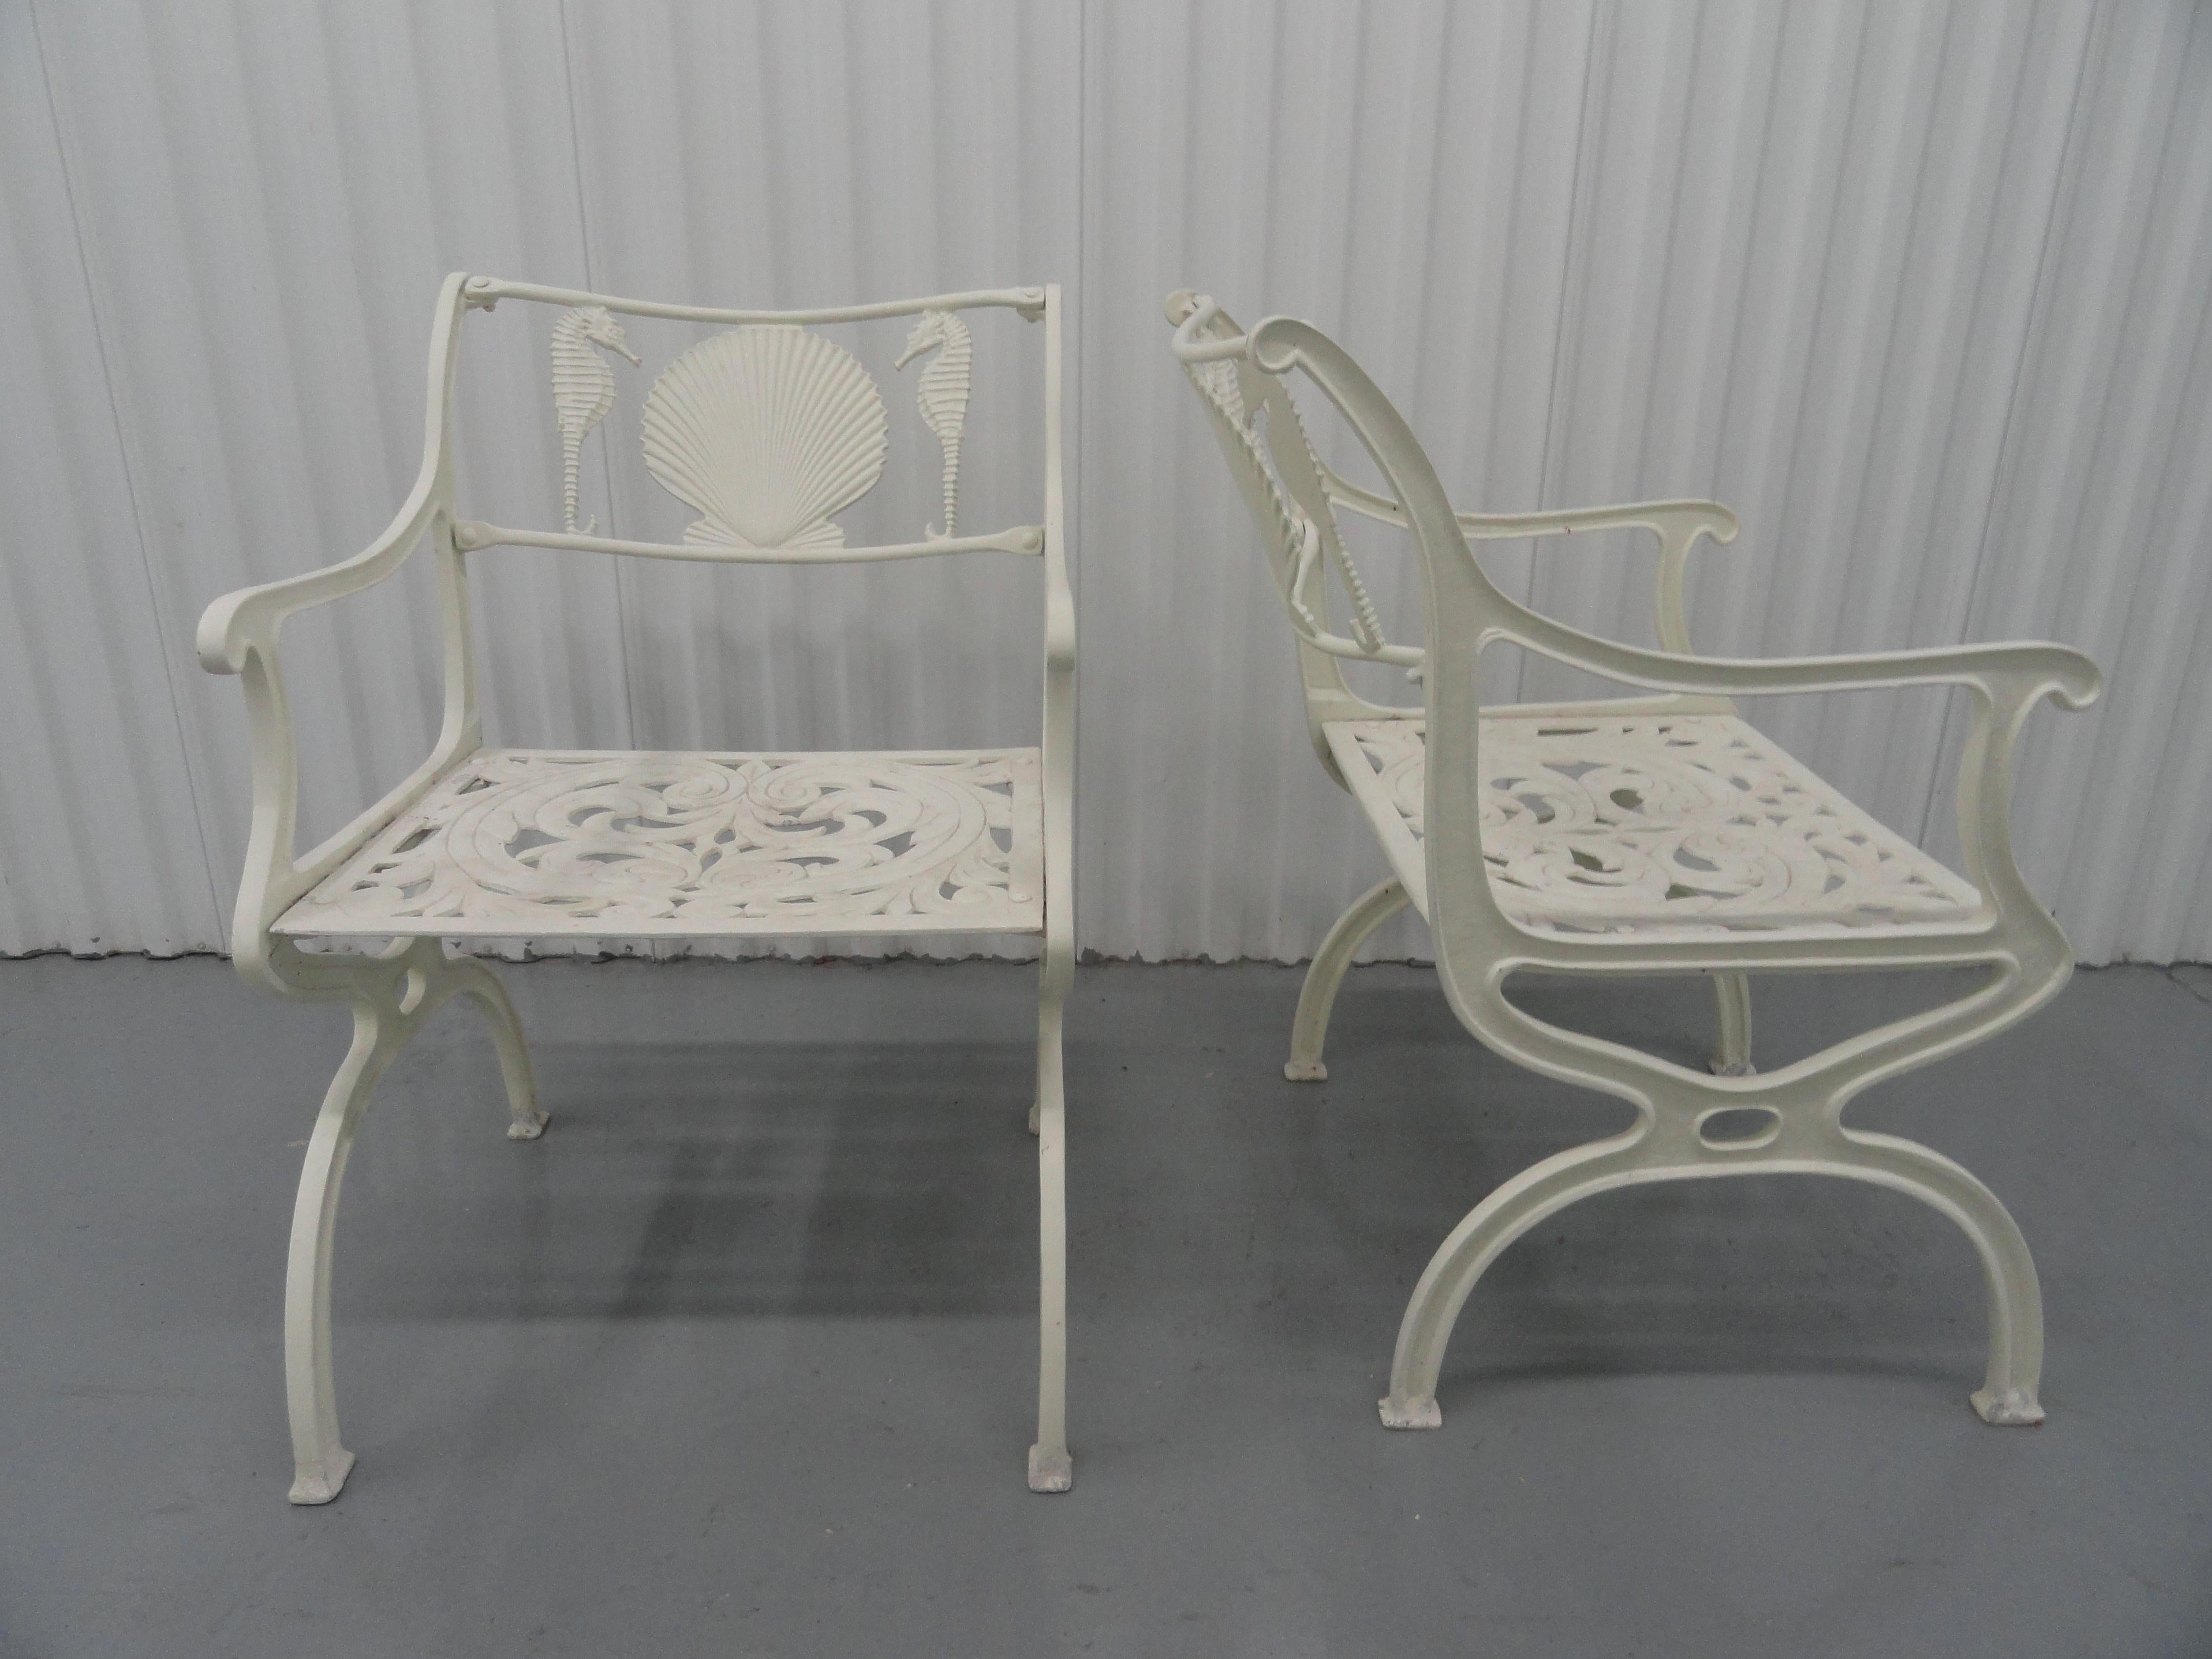 Set of 6 armchairs designed by Molla in the 1950s. They are made of cast aluminum and are painted in an off-white finish. Sturdy and heavy.